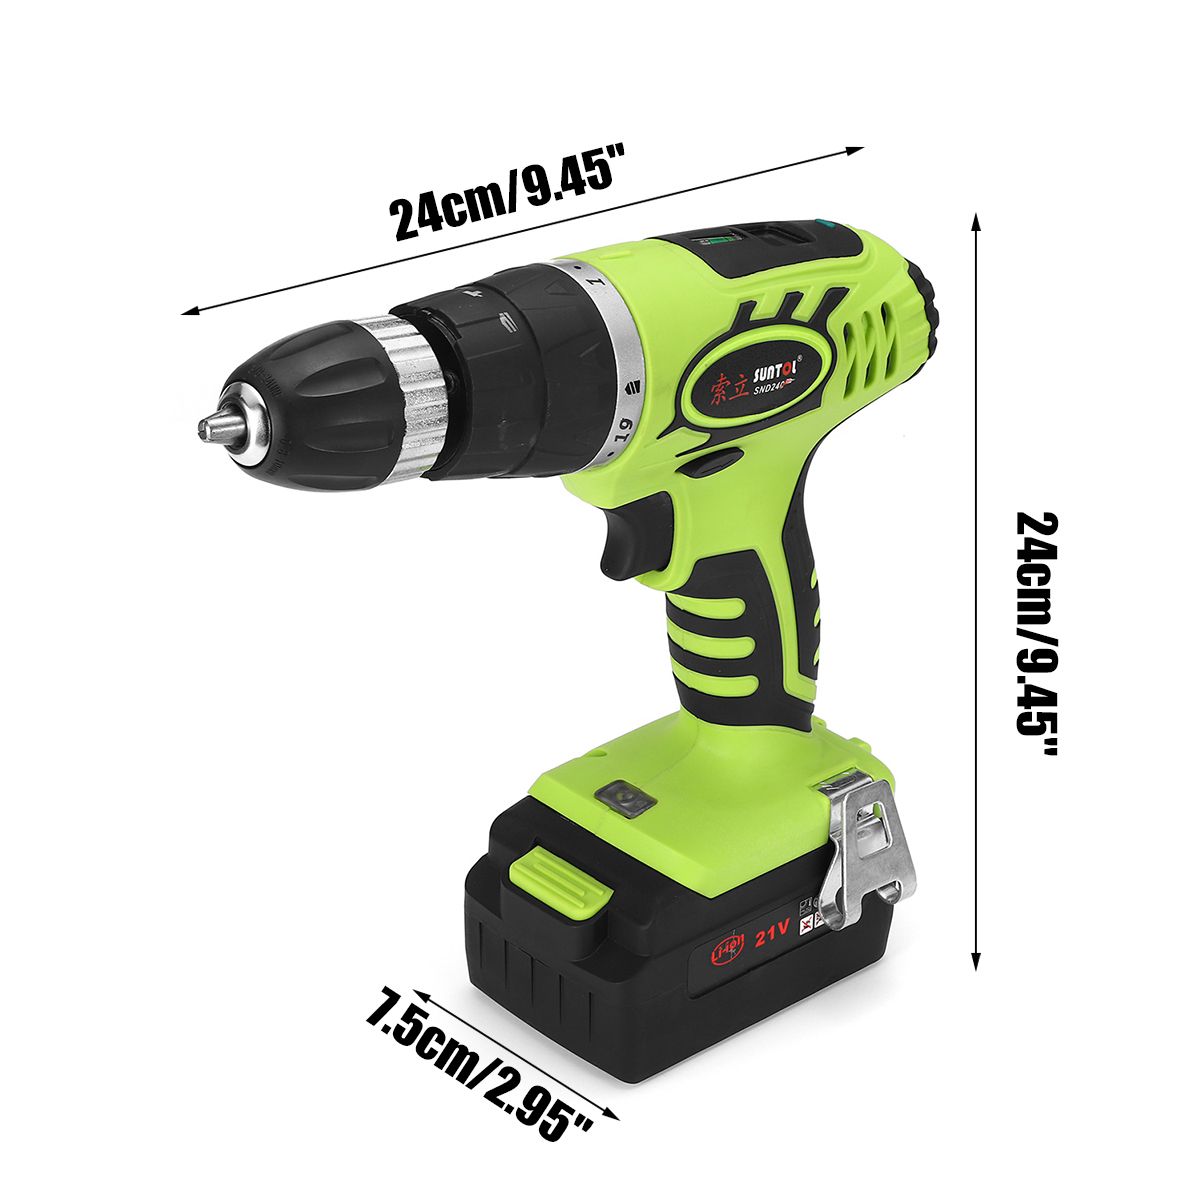 LCD-Electricity-Display-Cordless-Electric-Screwdriver-1000mAh-Li-ion-Battery-Multifunction-Lithium-P-1433165